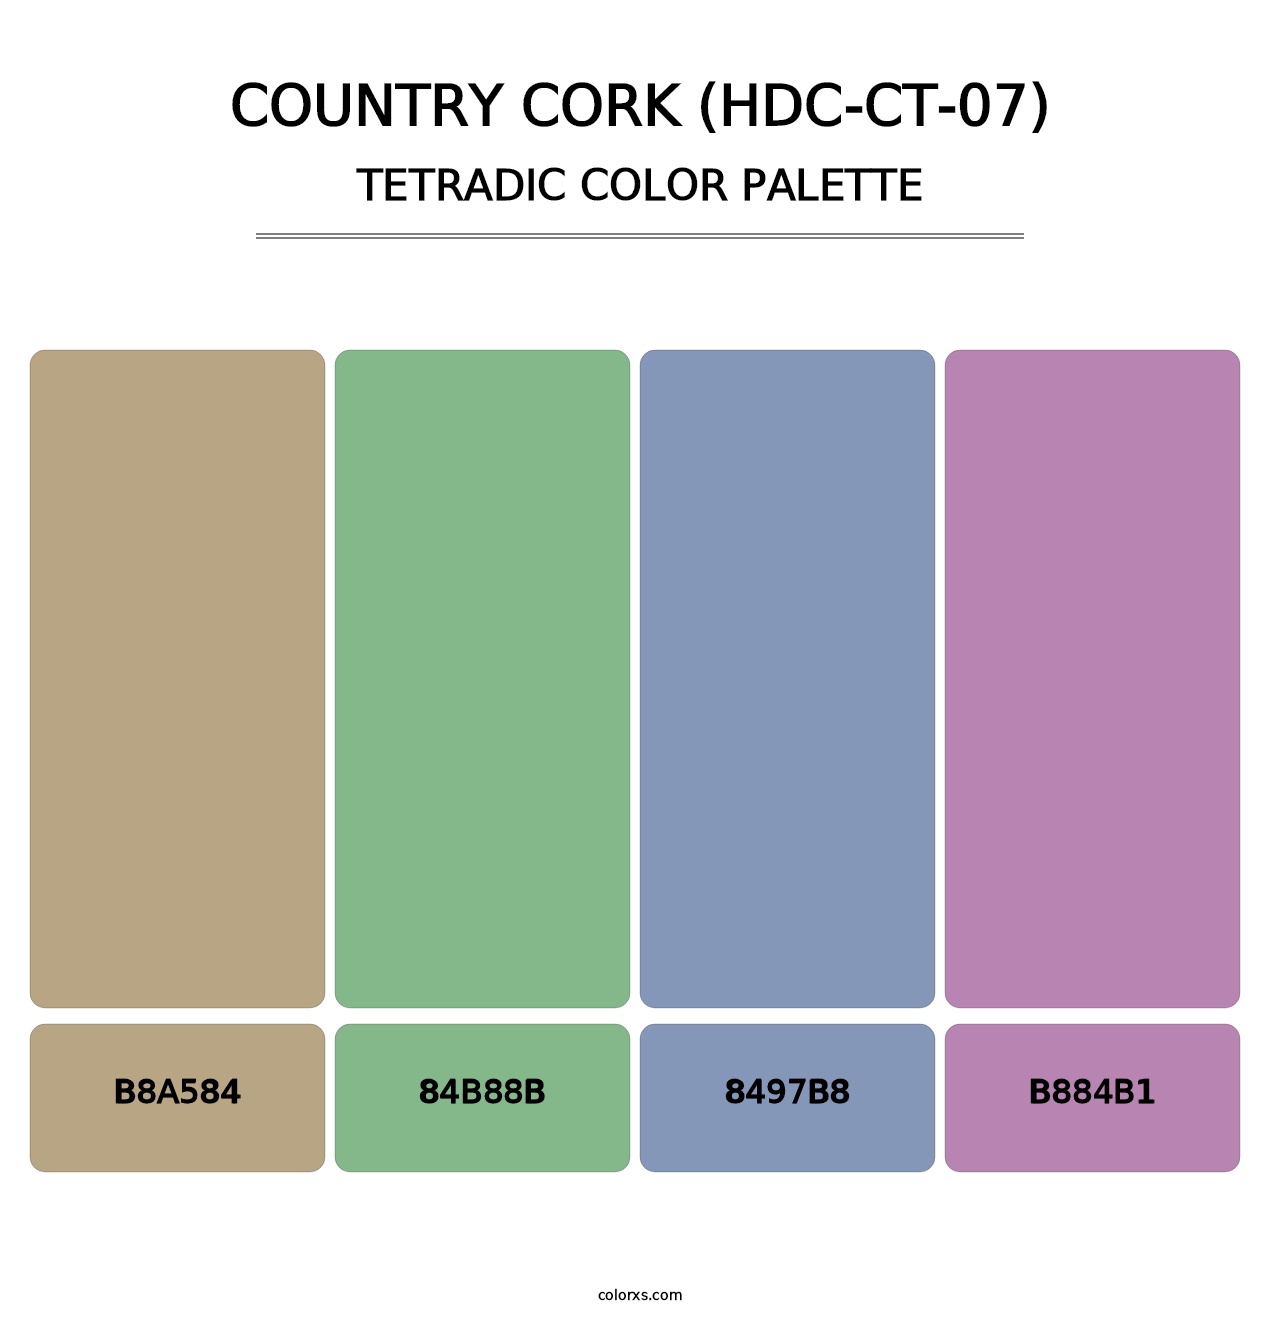 Country Cork (HDC-CT-07) - Tetradic Color Palette